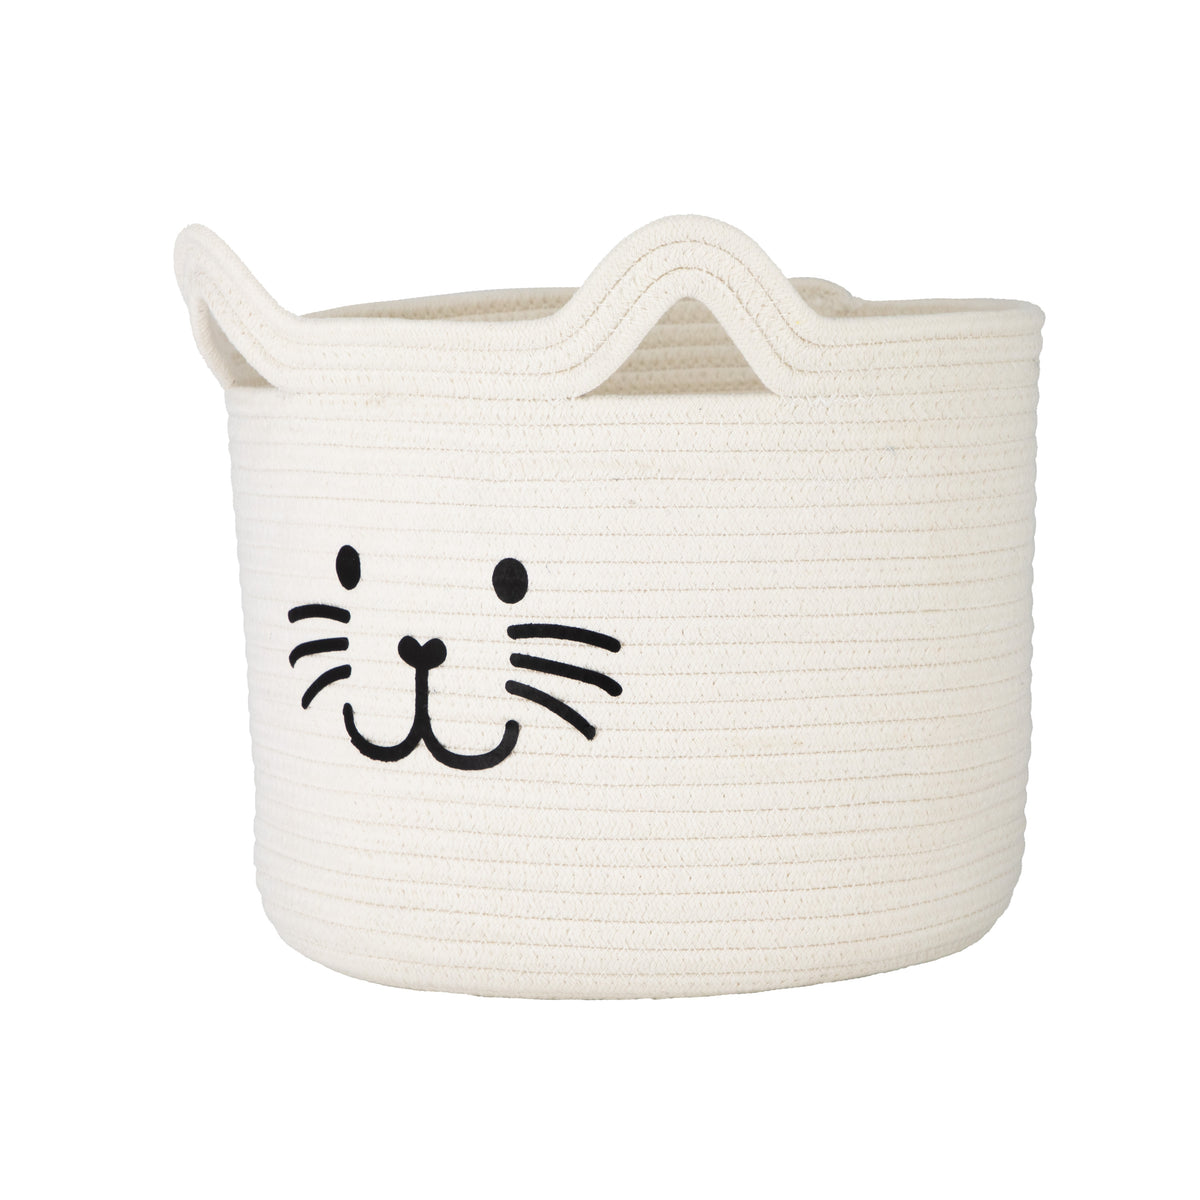 Cat Face Toy Storage